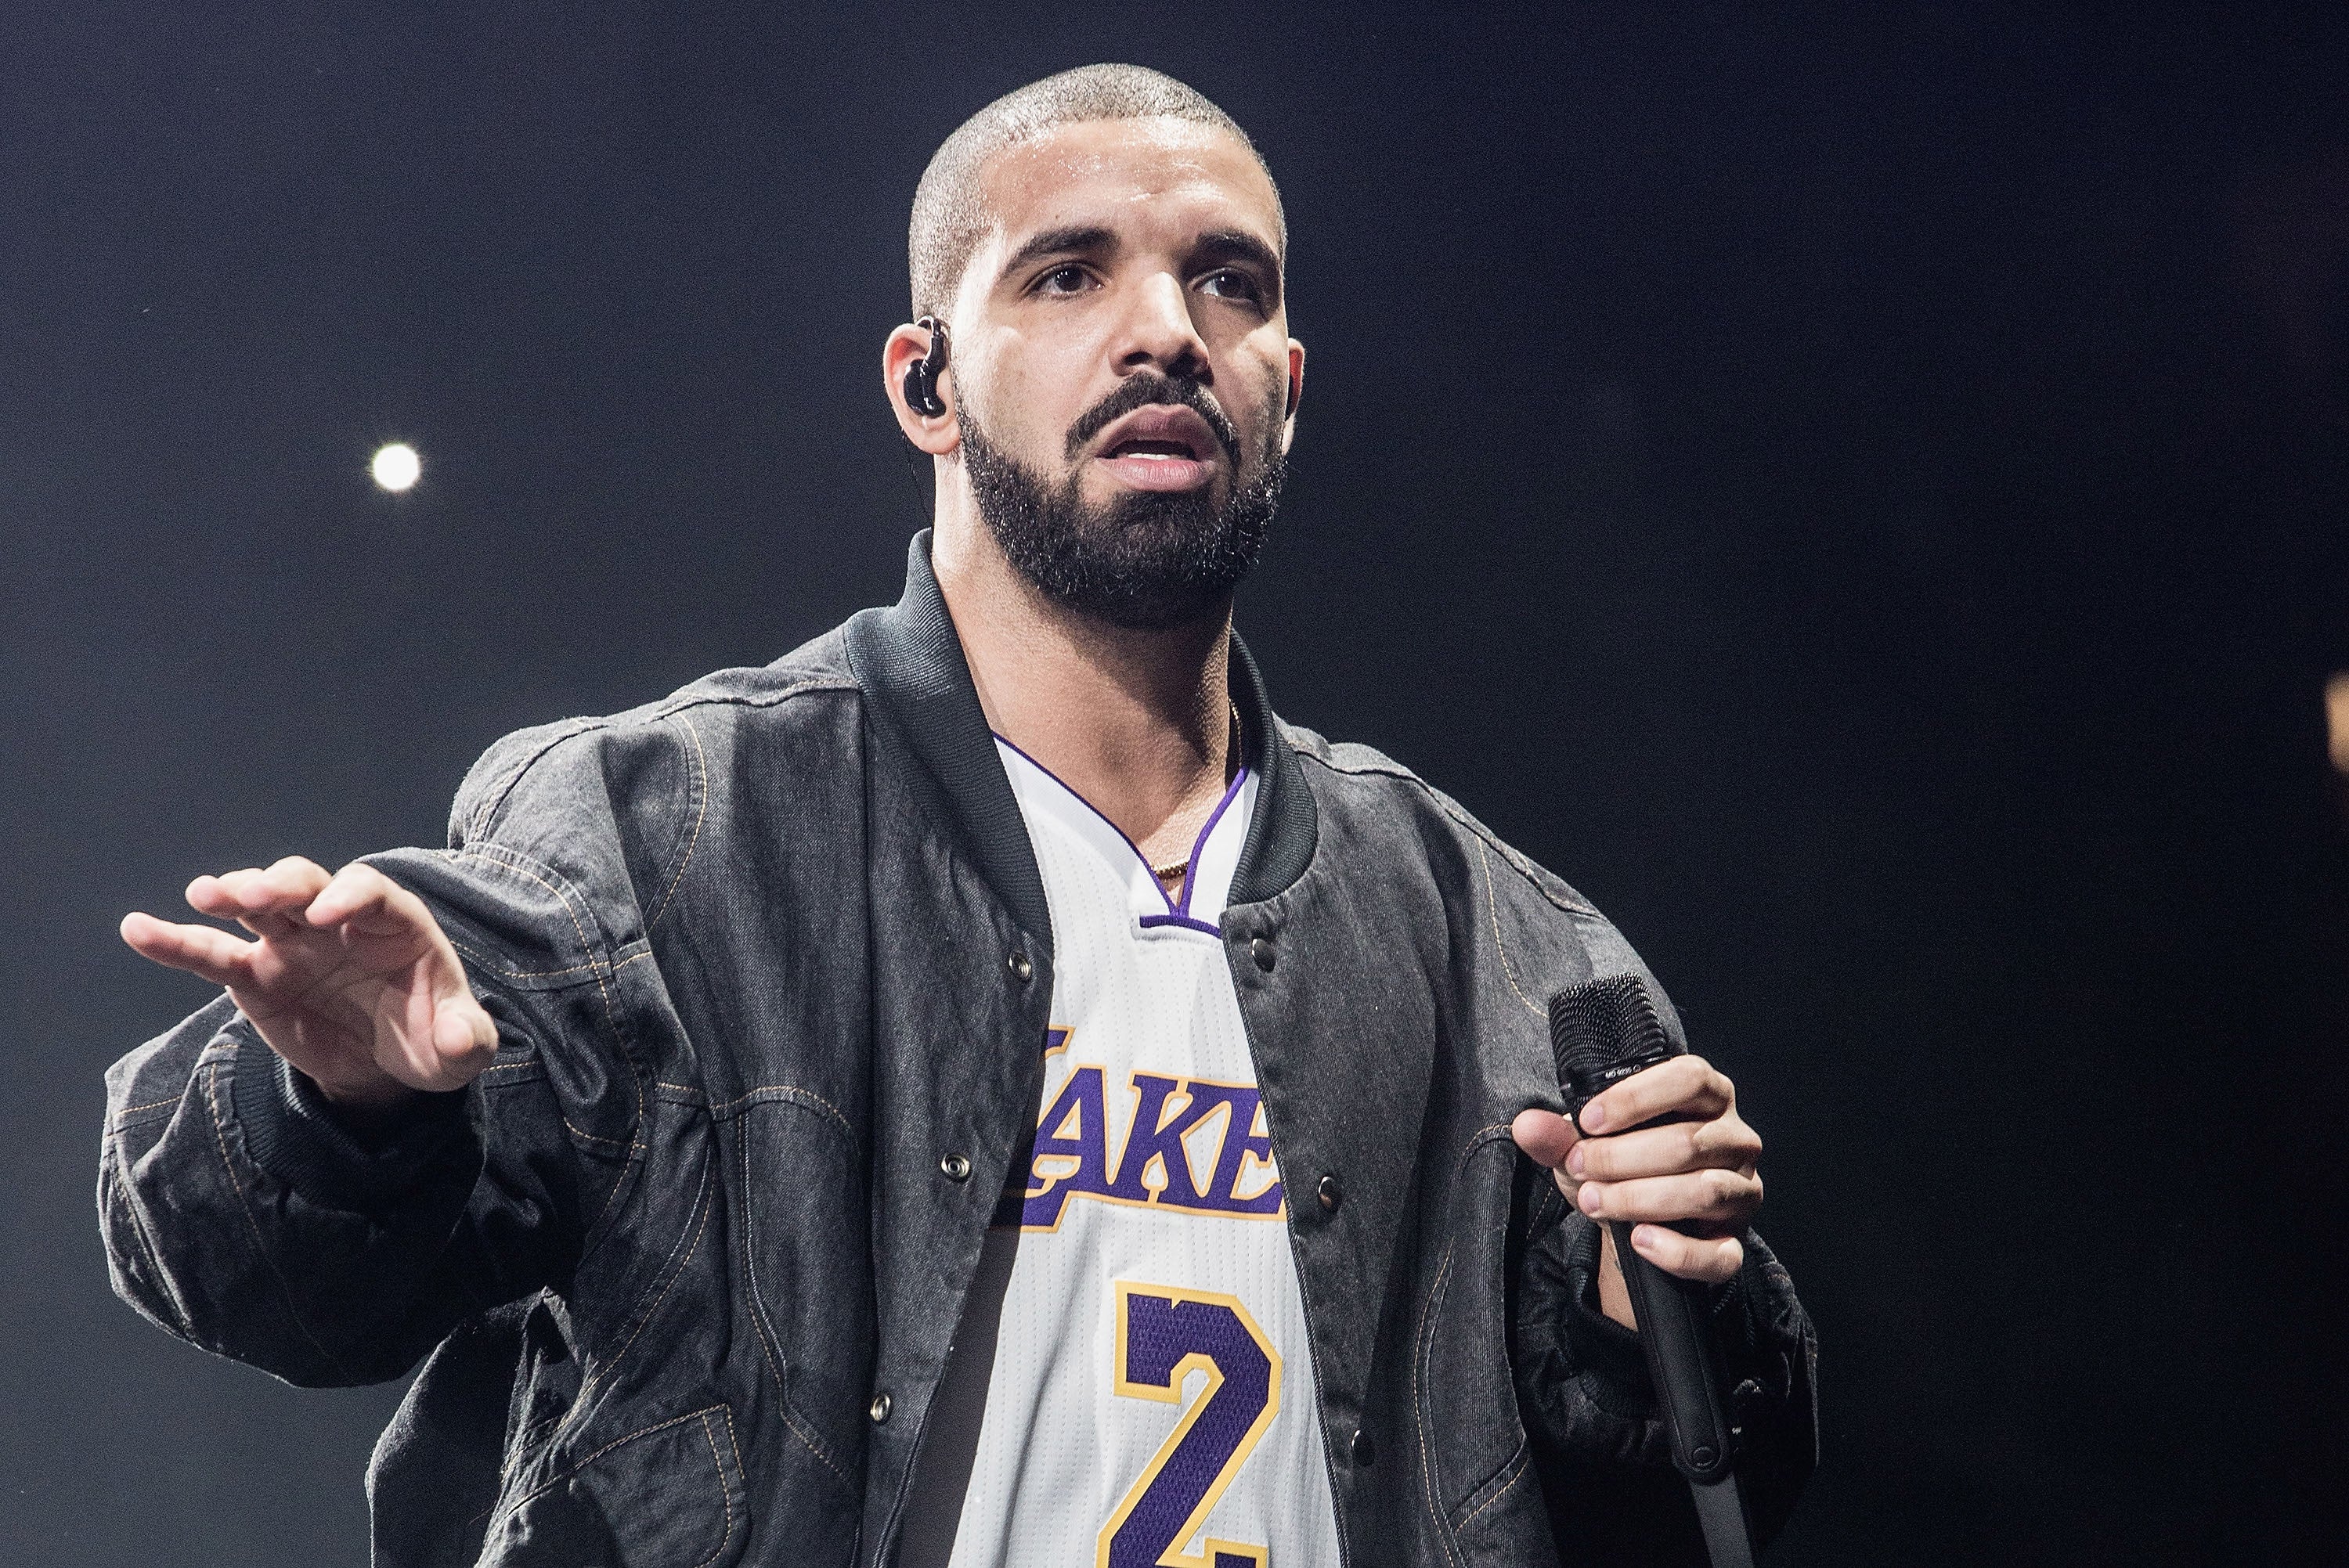 Drake Turned Down The Opportunity To Work With Harvey Weinstein After Getting 'Bad Feedback'
